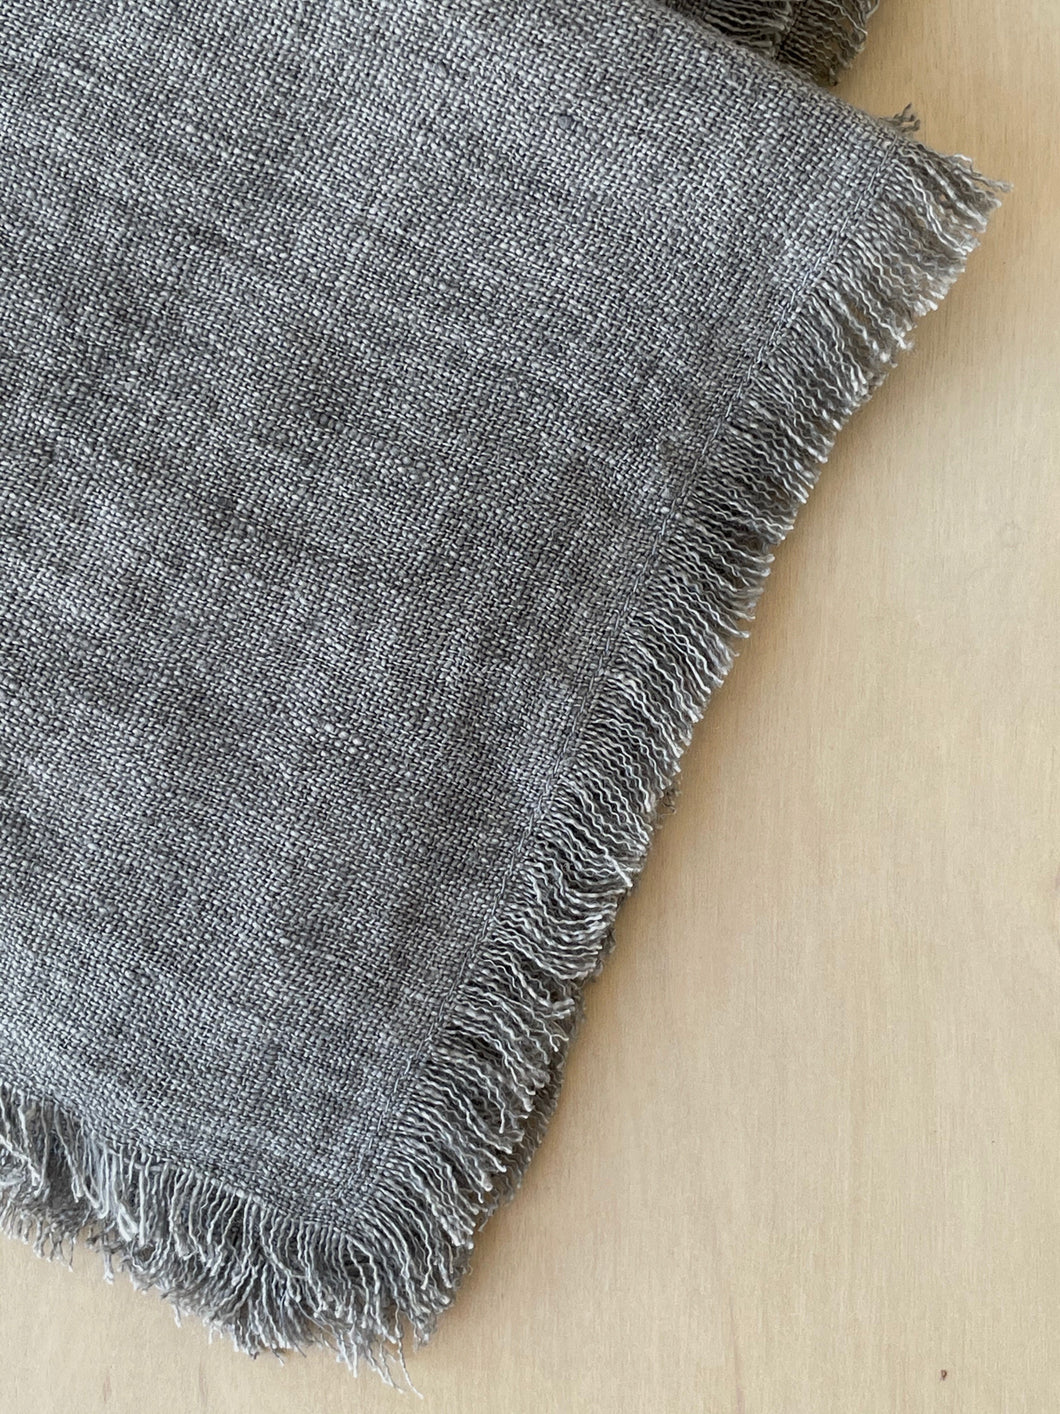 Stonewashed Linen Dinner Napkin in Oyster